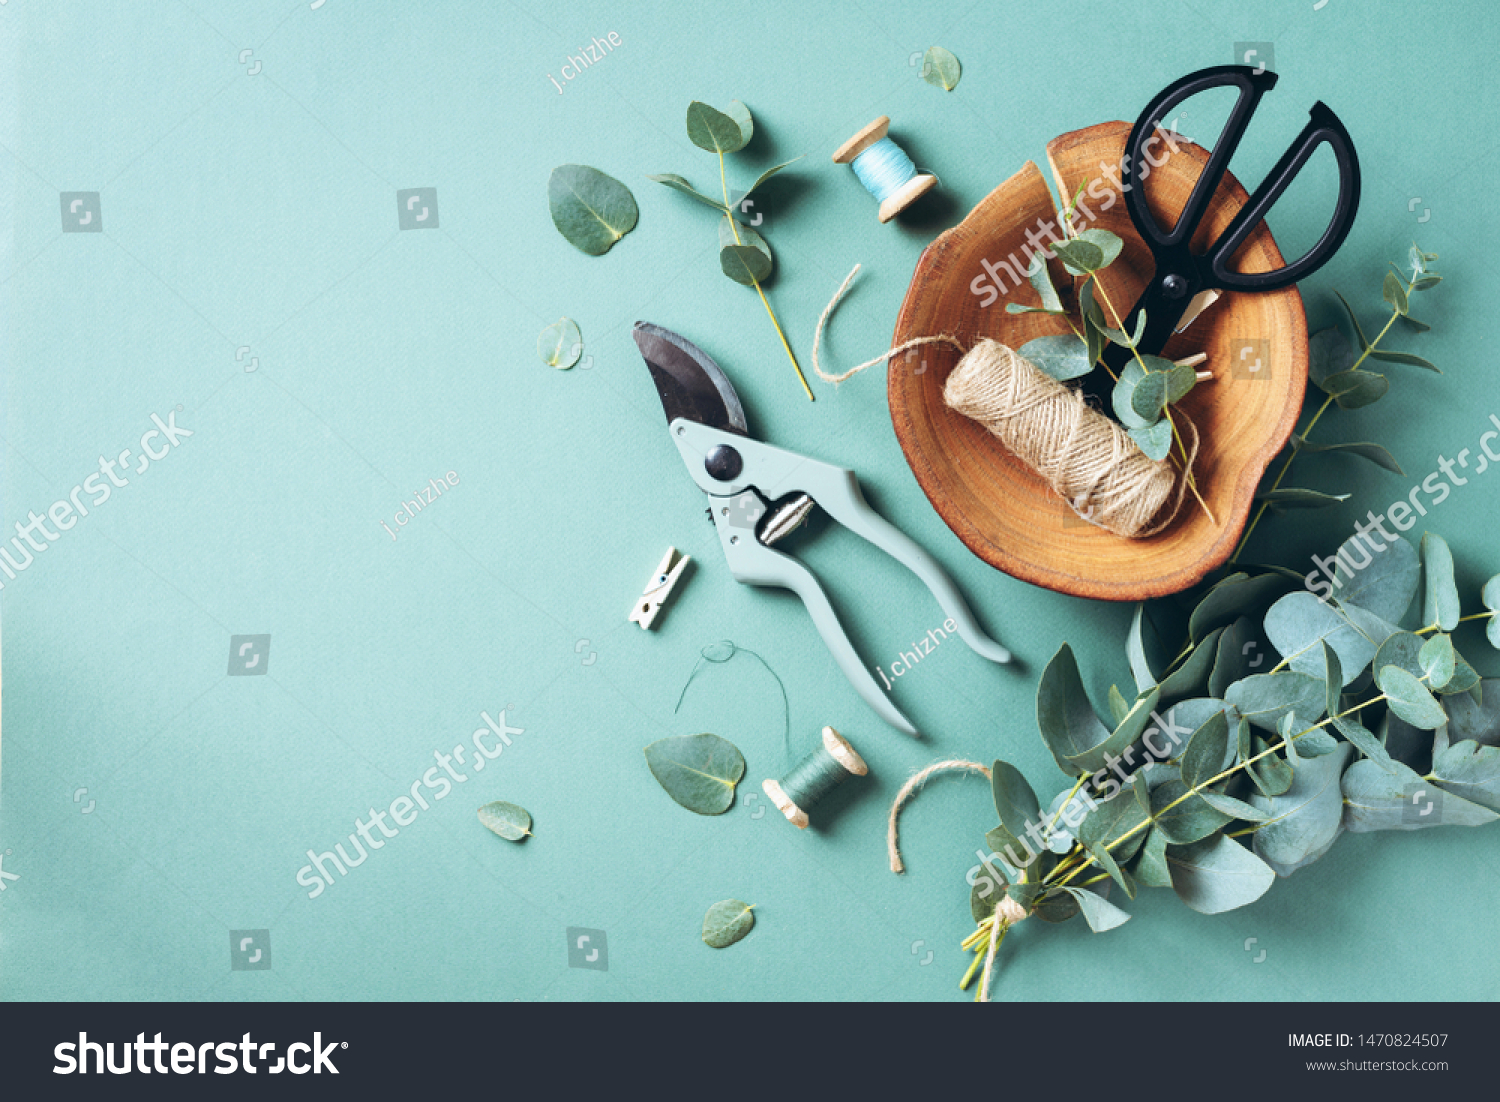 Eucalyptus branches and leaves, garden pruner, scissors, wooden plate over green background with copy space. Florist concept, top view #1470824507